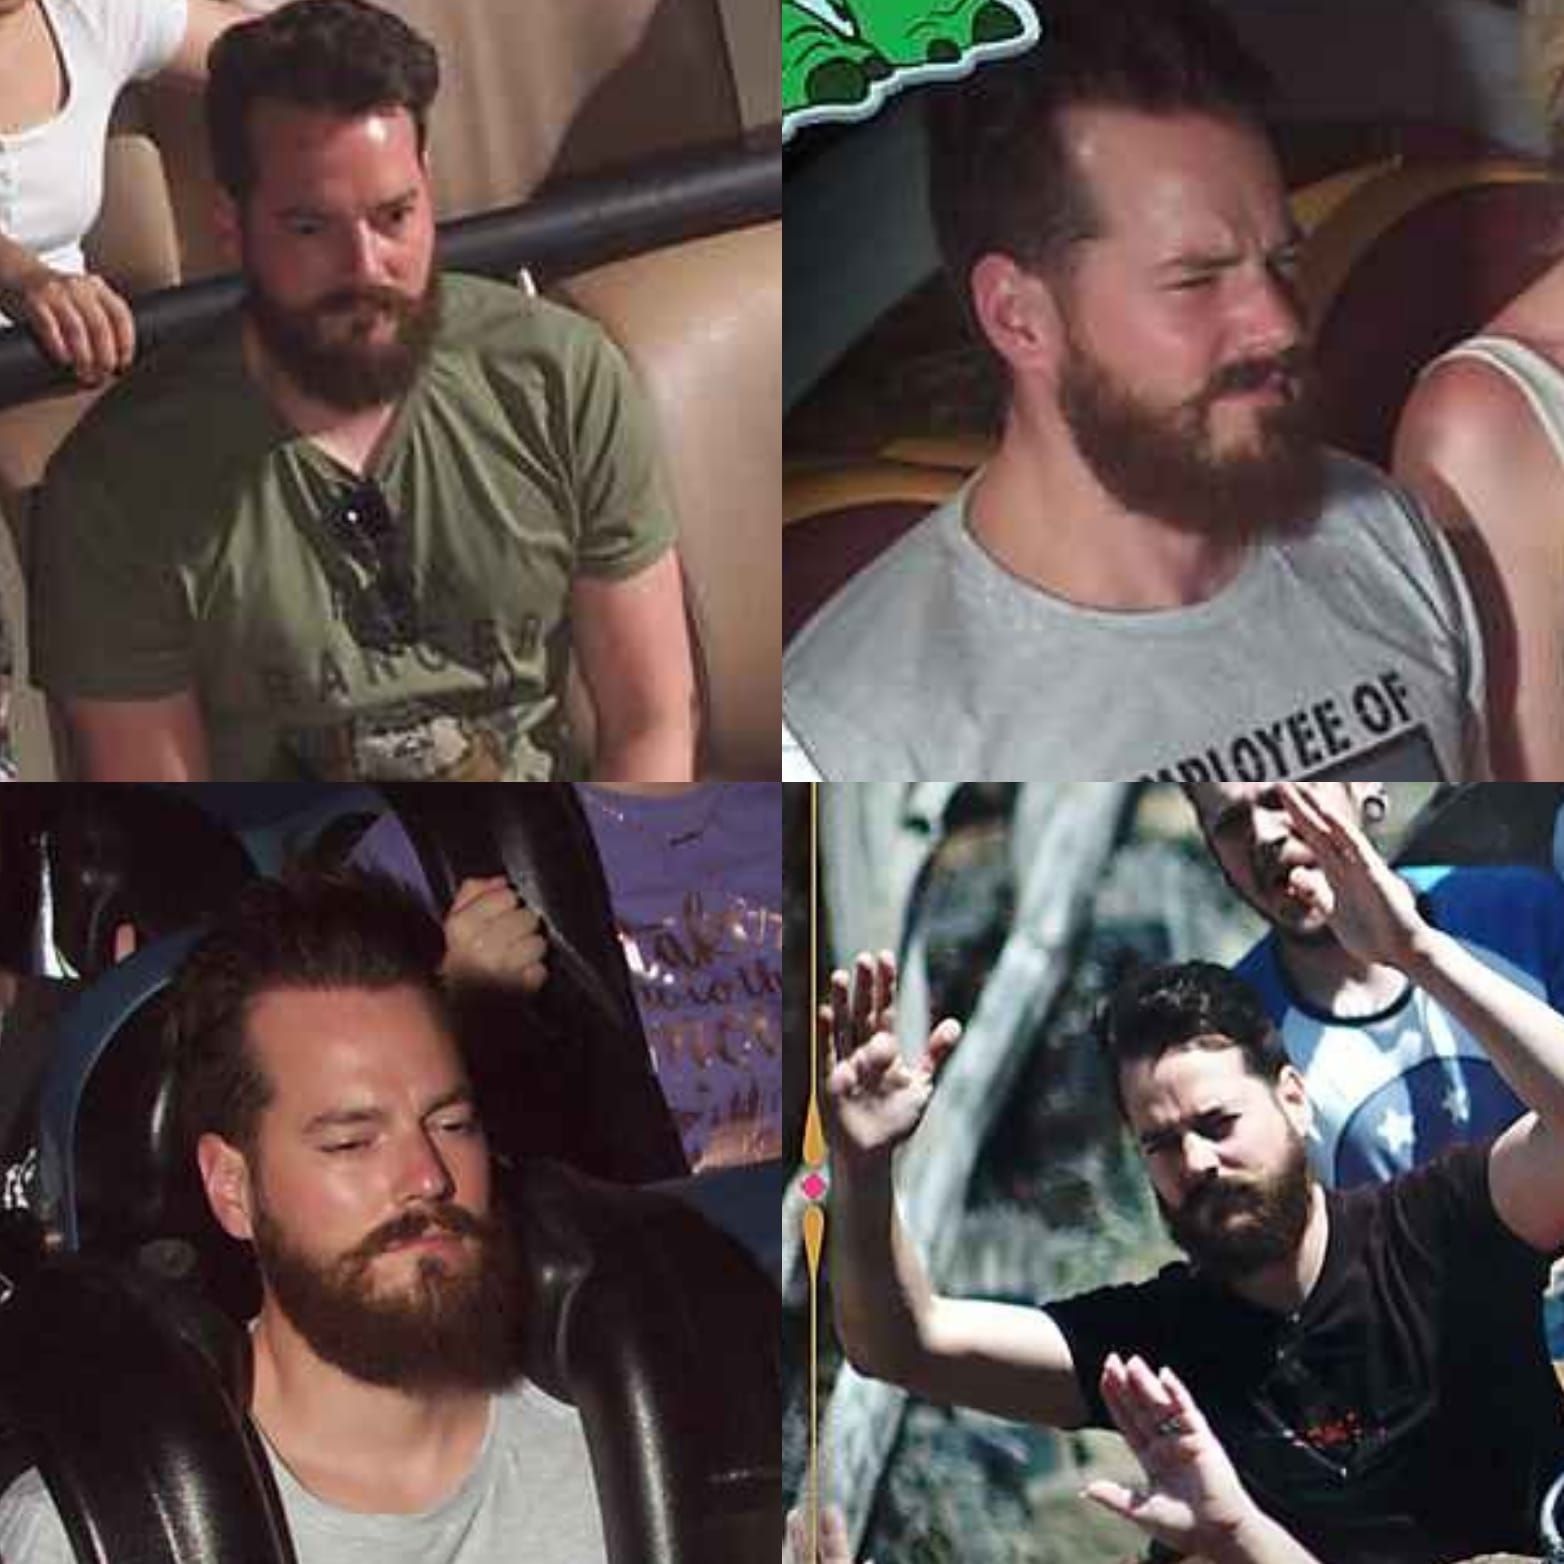 My wife has always said I look miserable on rollercoasters. After a recent visit to Orlando, turns out she's right.